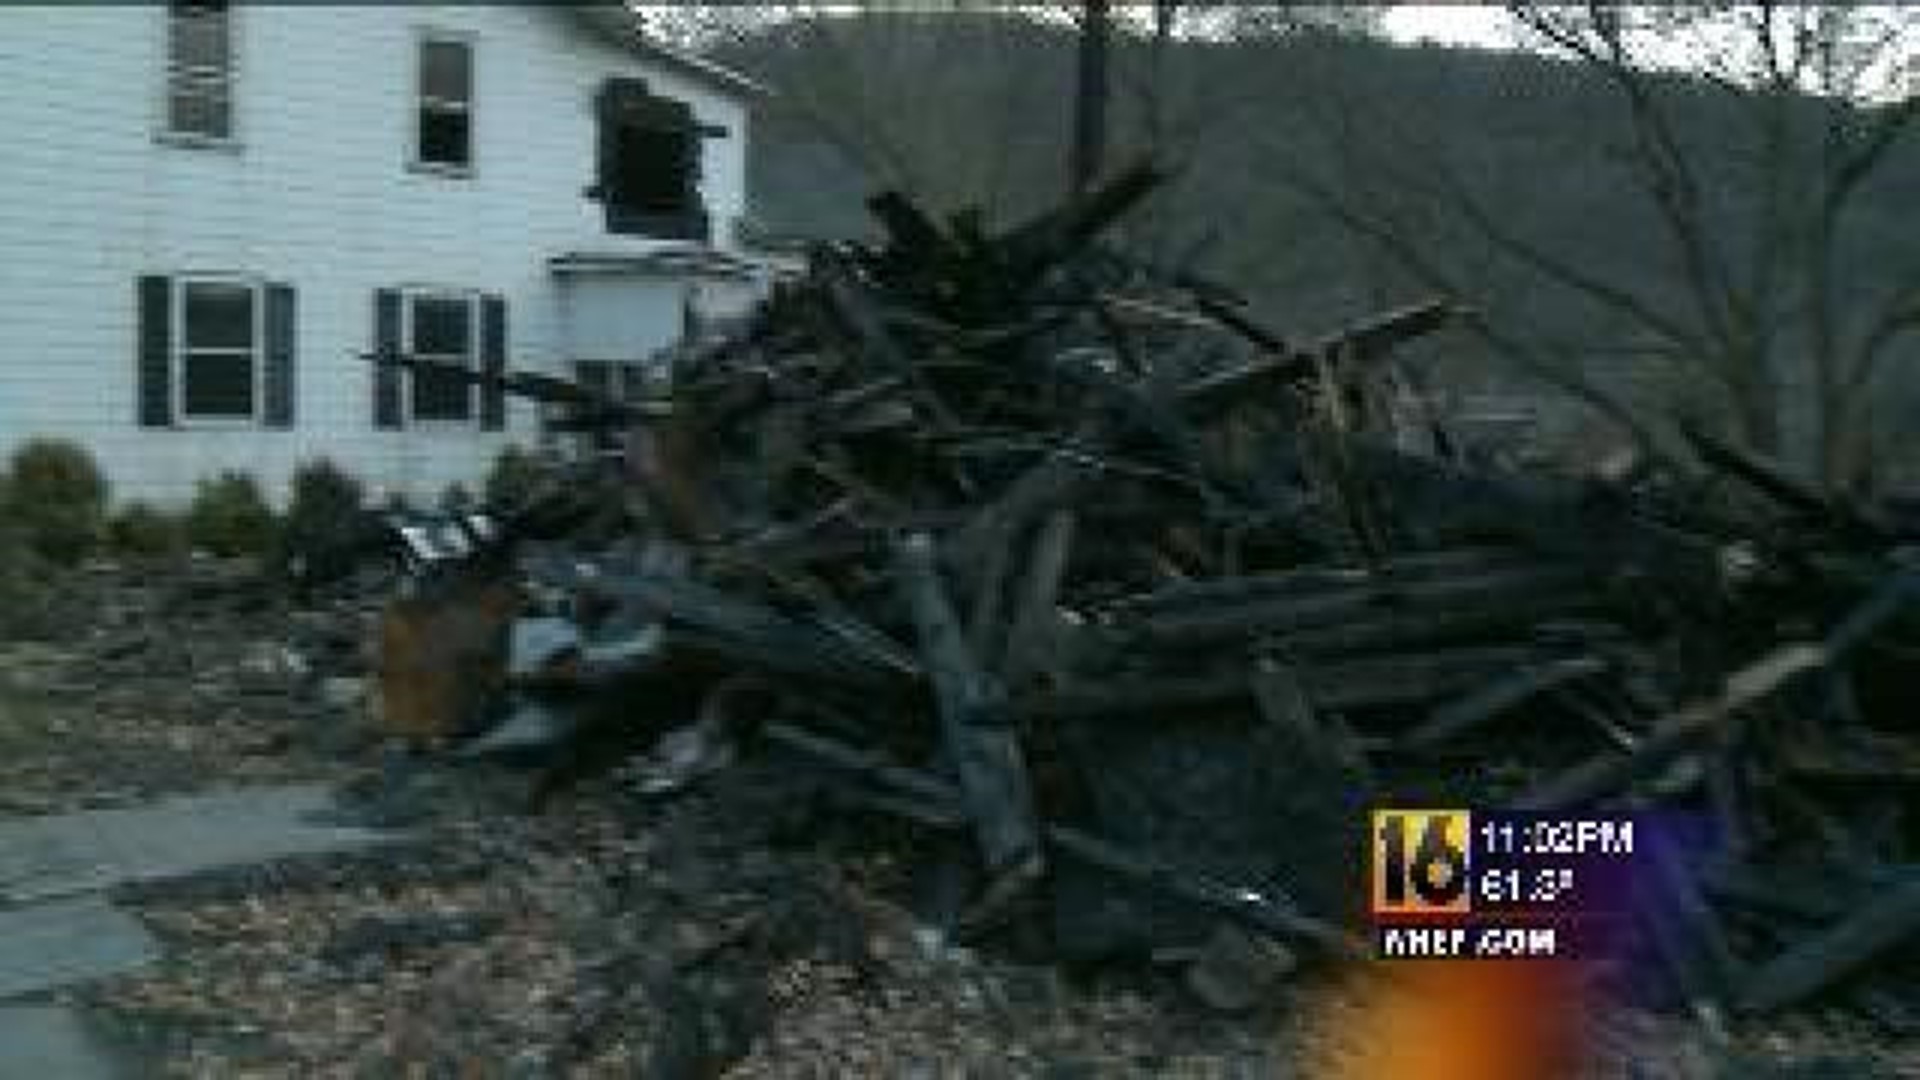 Neighbors Concerned After Second Fire In A Month